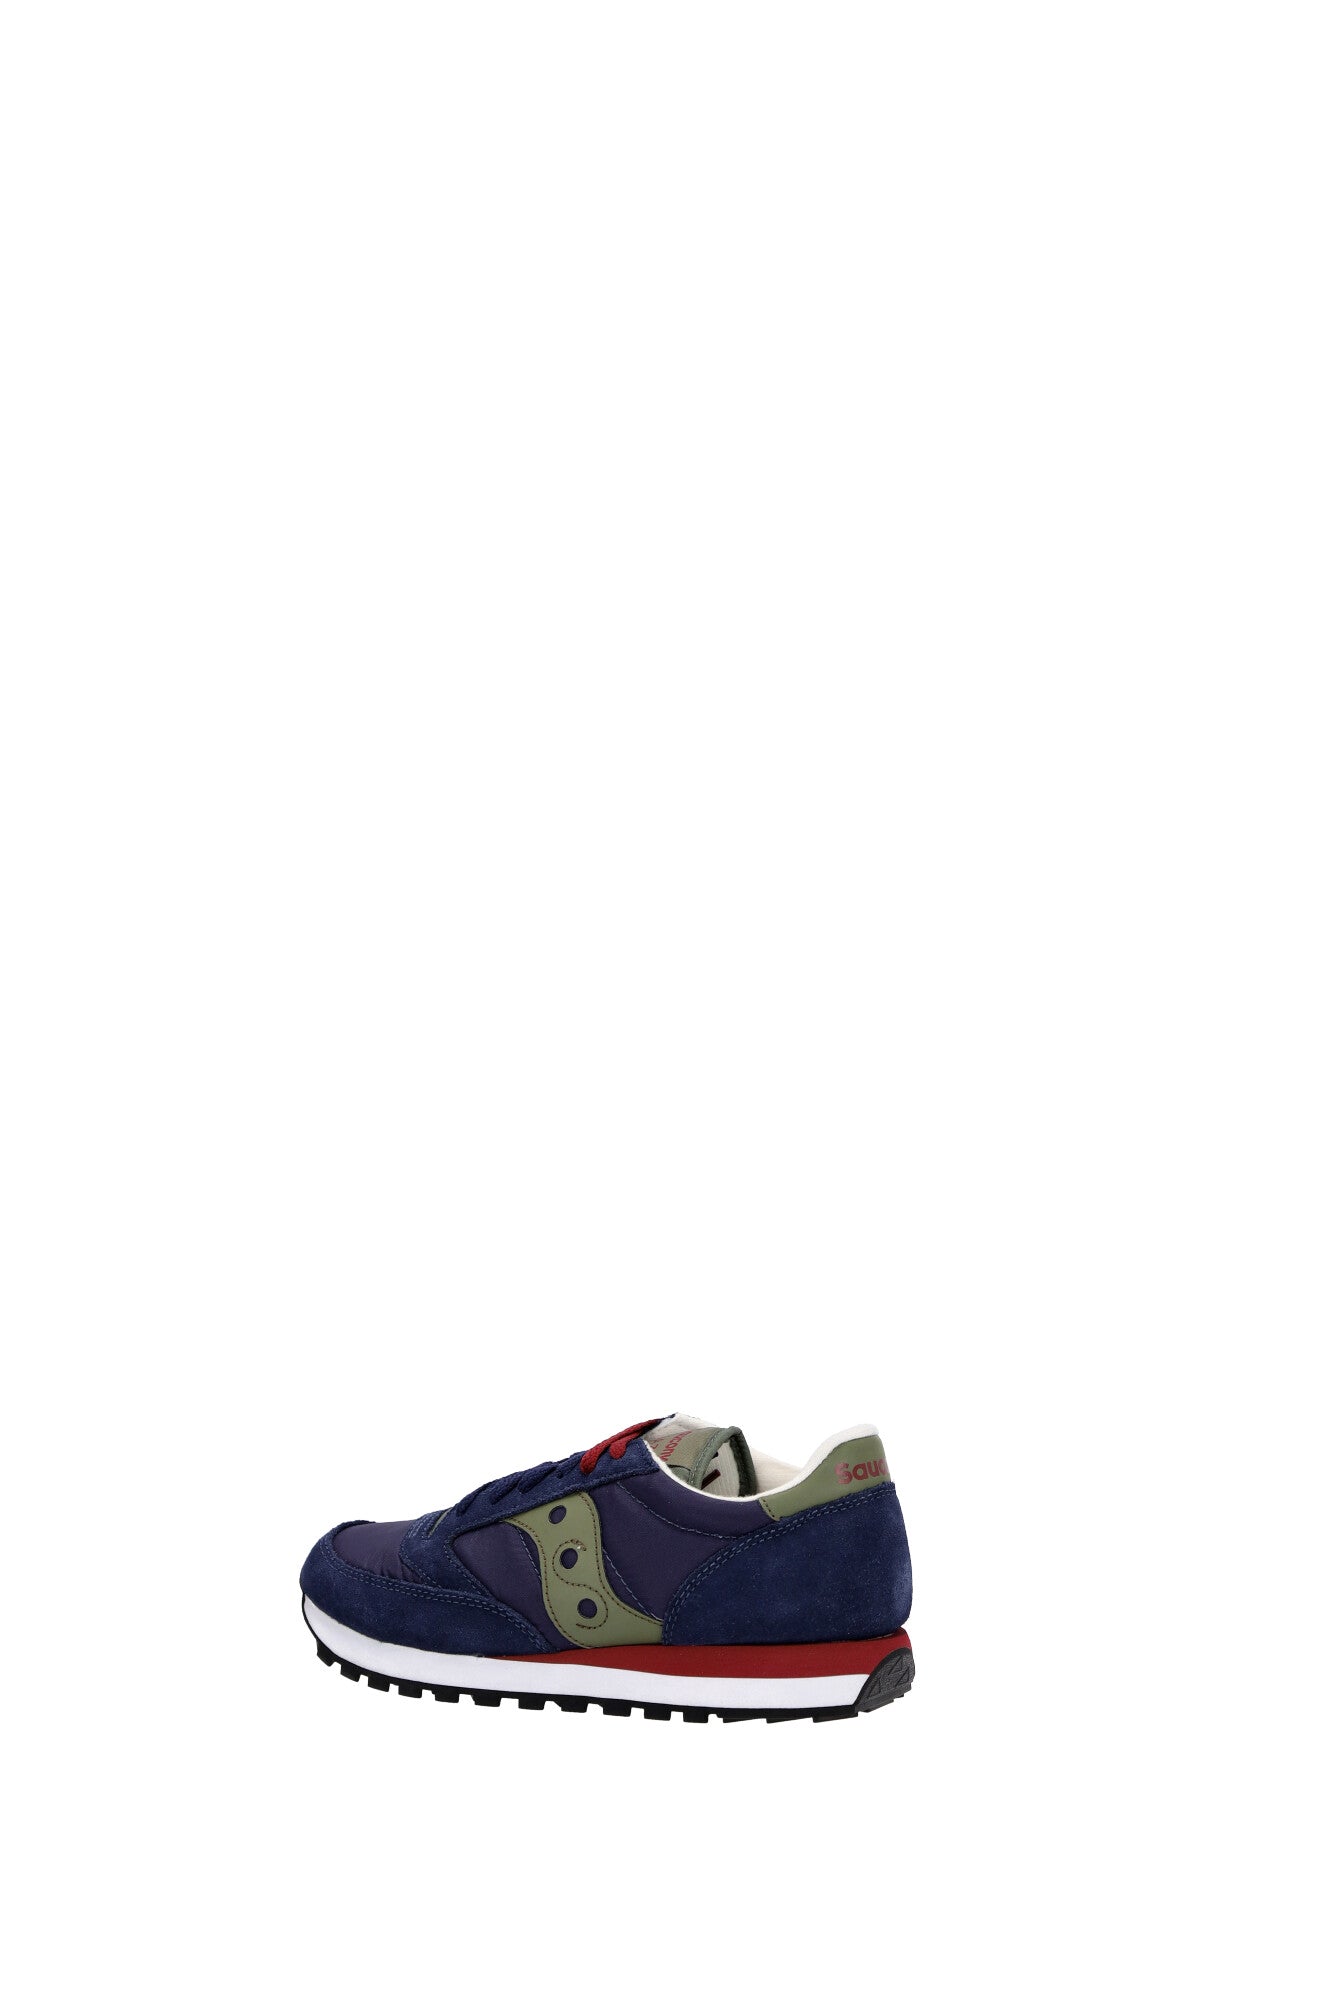 NAVY/FOREST